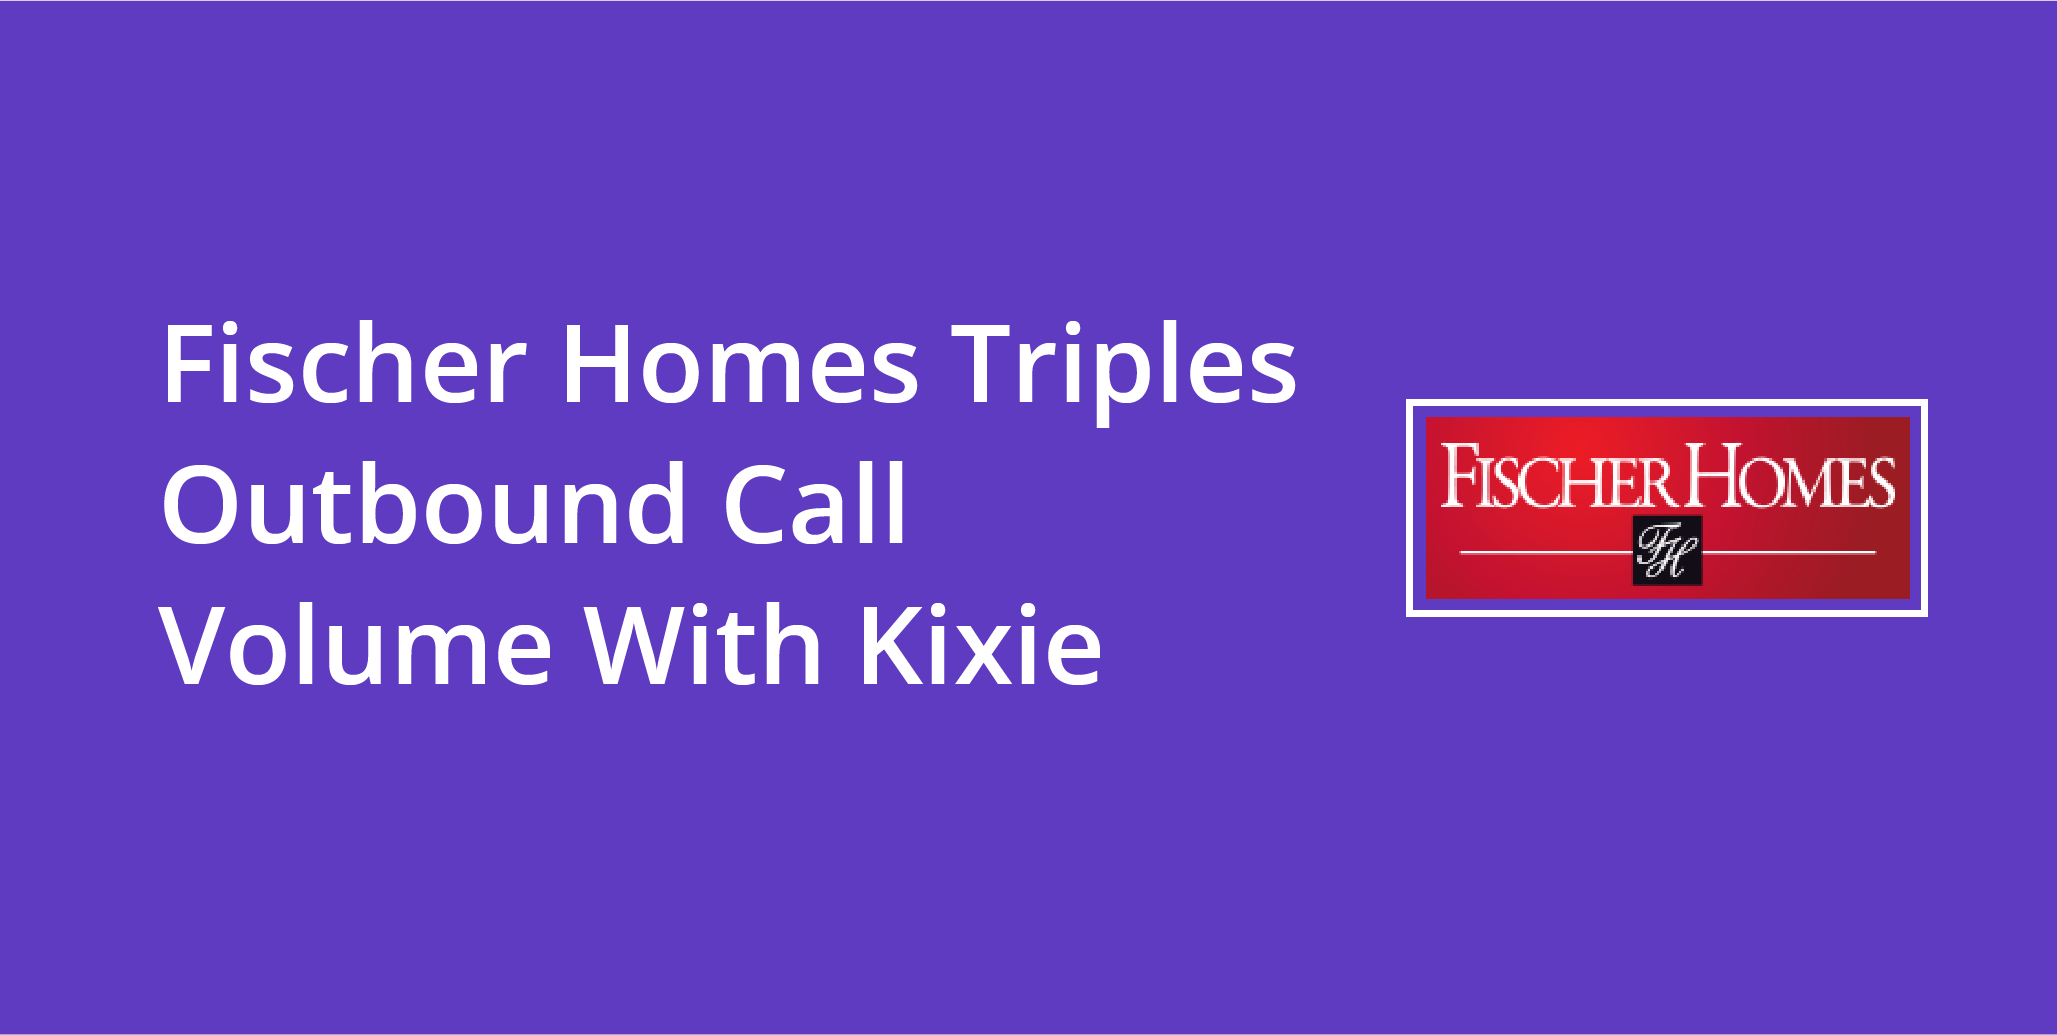 Fischer Homes Triples Outbound Call Volume With Kixie | Telephones for business